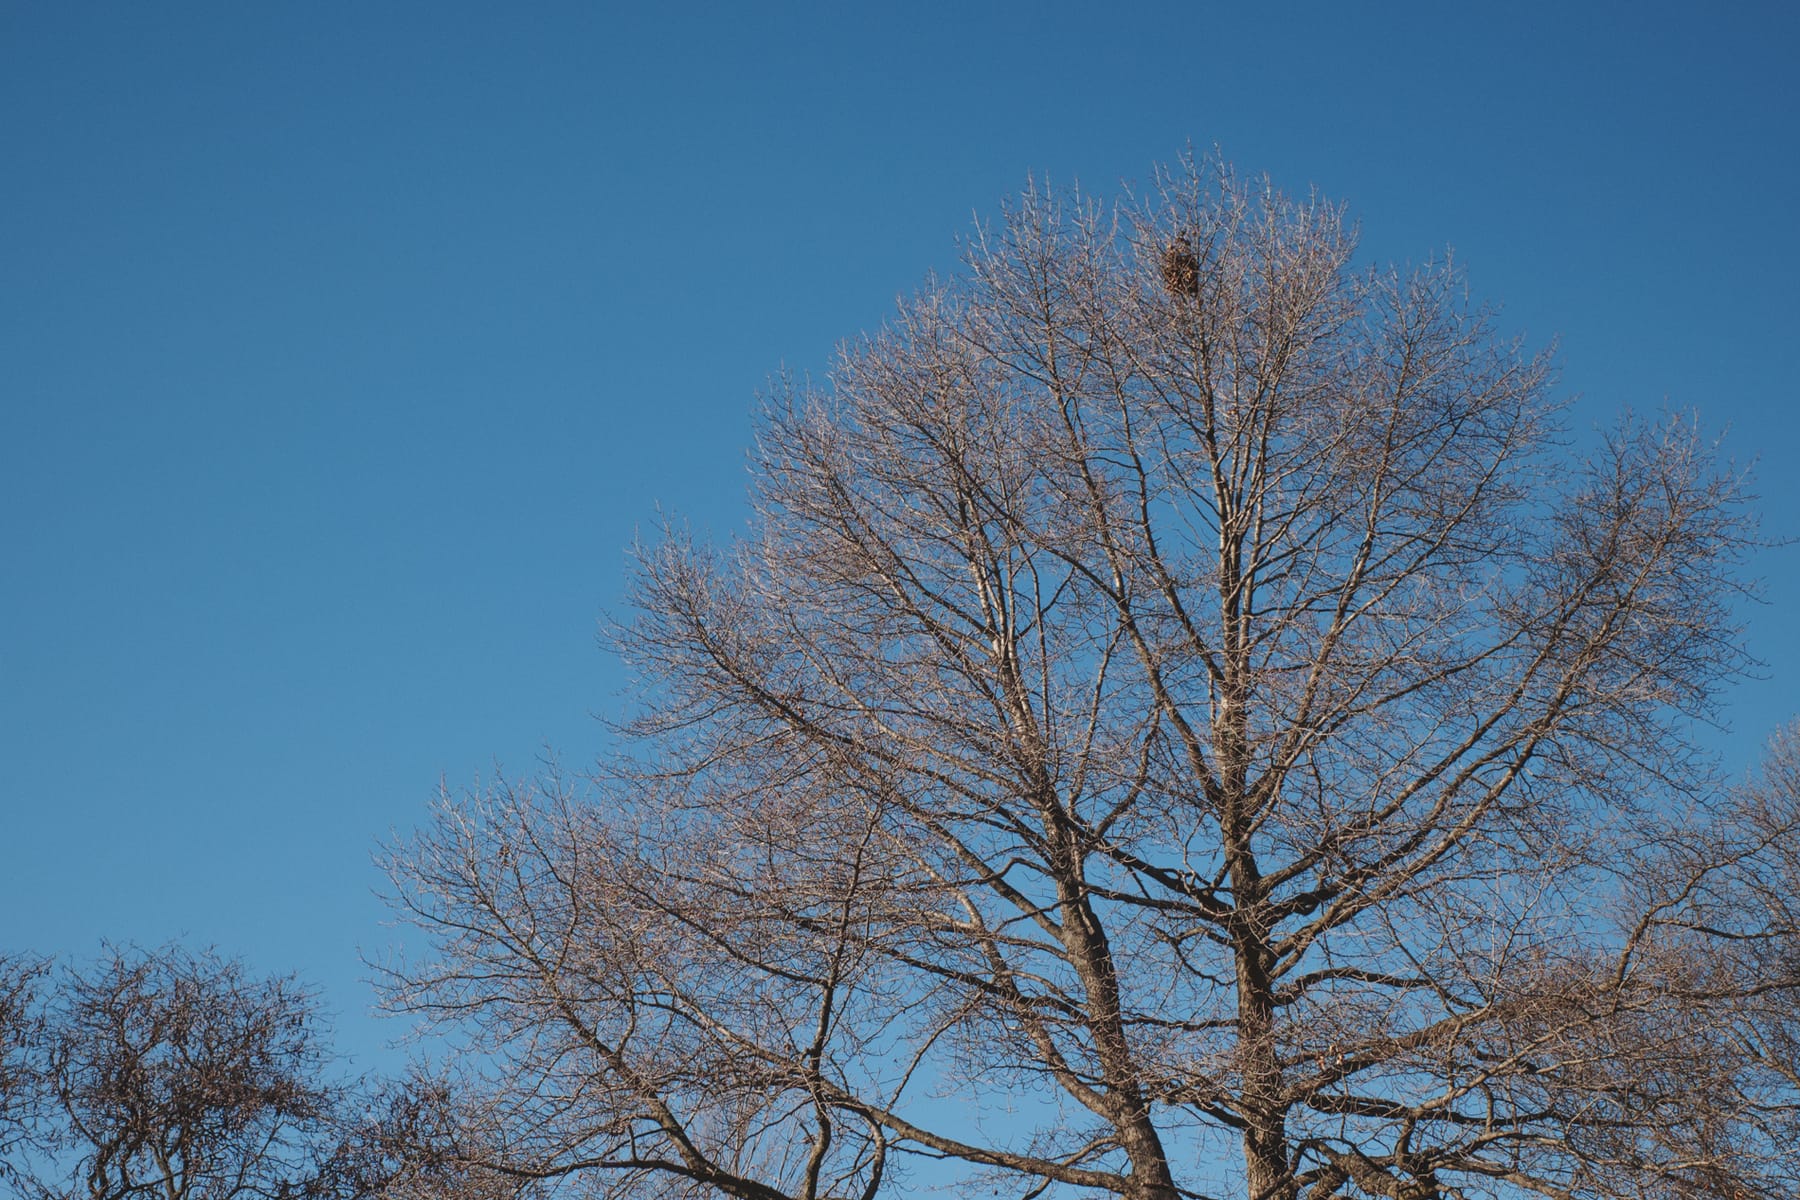 Clear winter sky with treetops, large leaf nest in one.